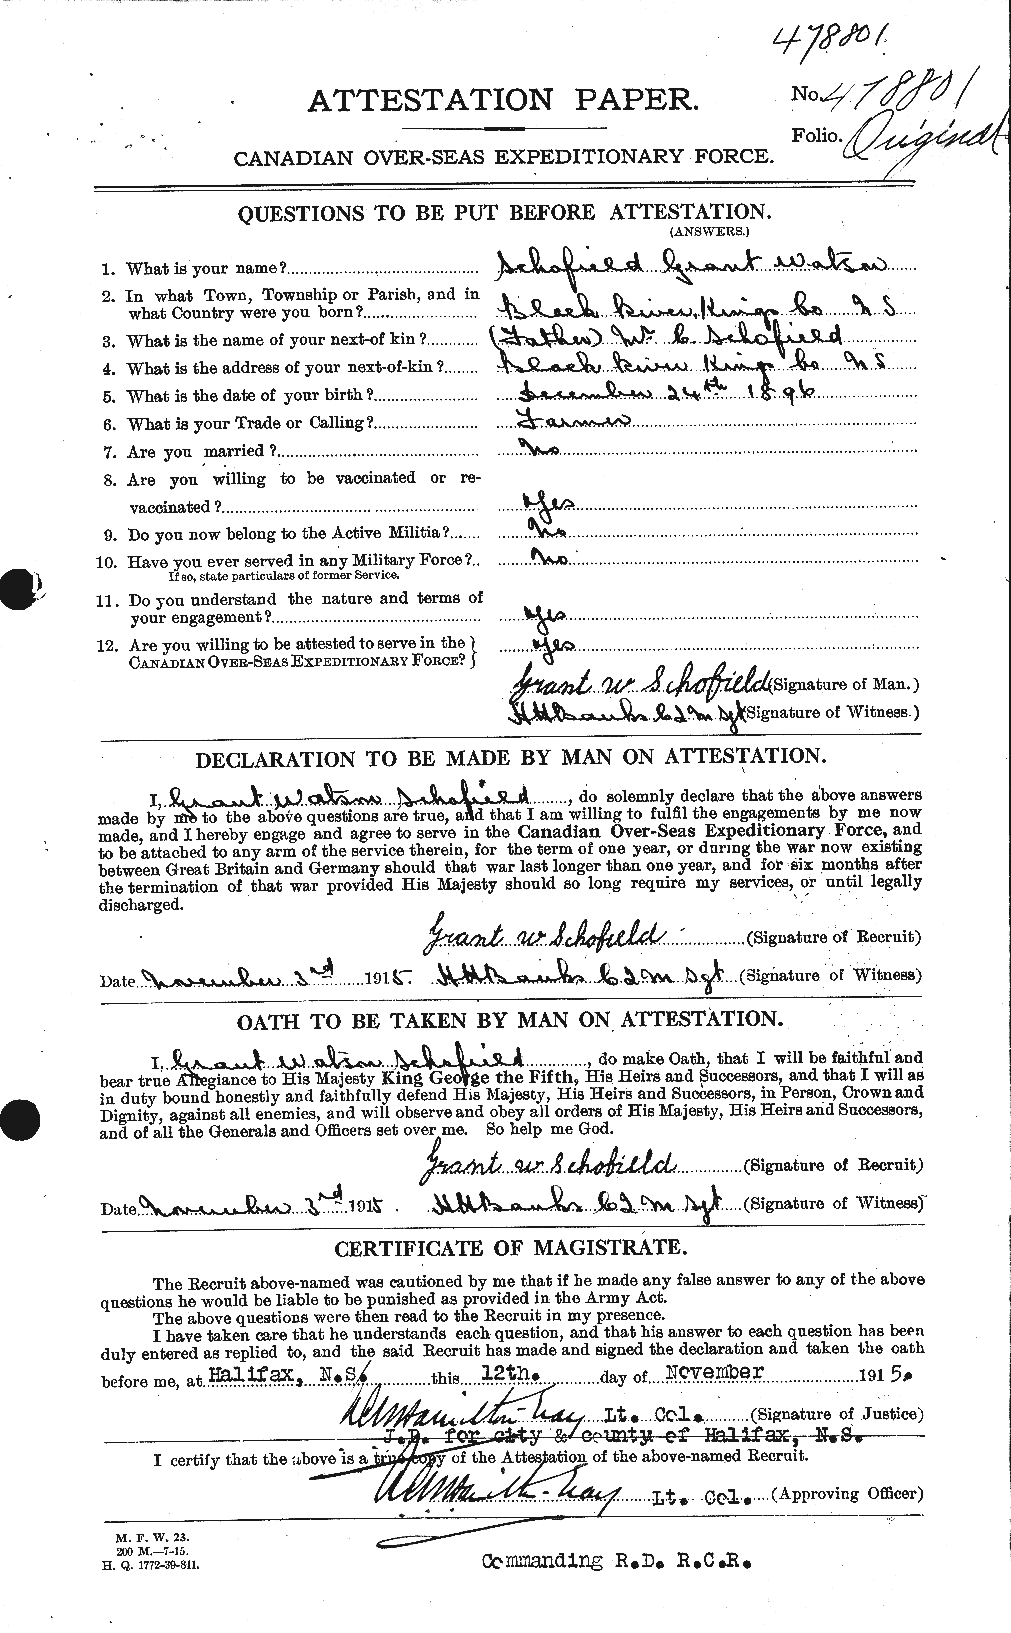 Personnel Records of the First World War - CEF 081105a